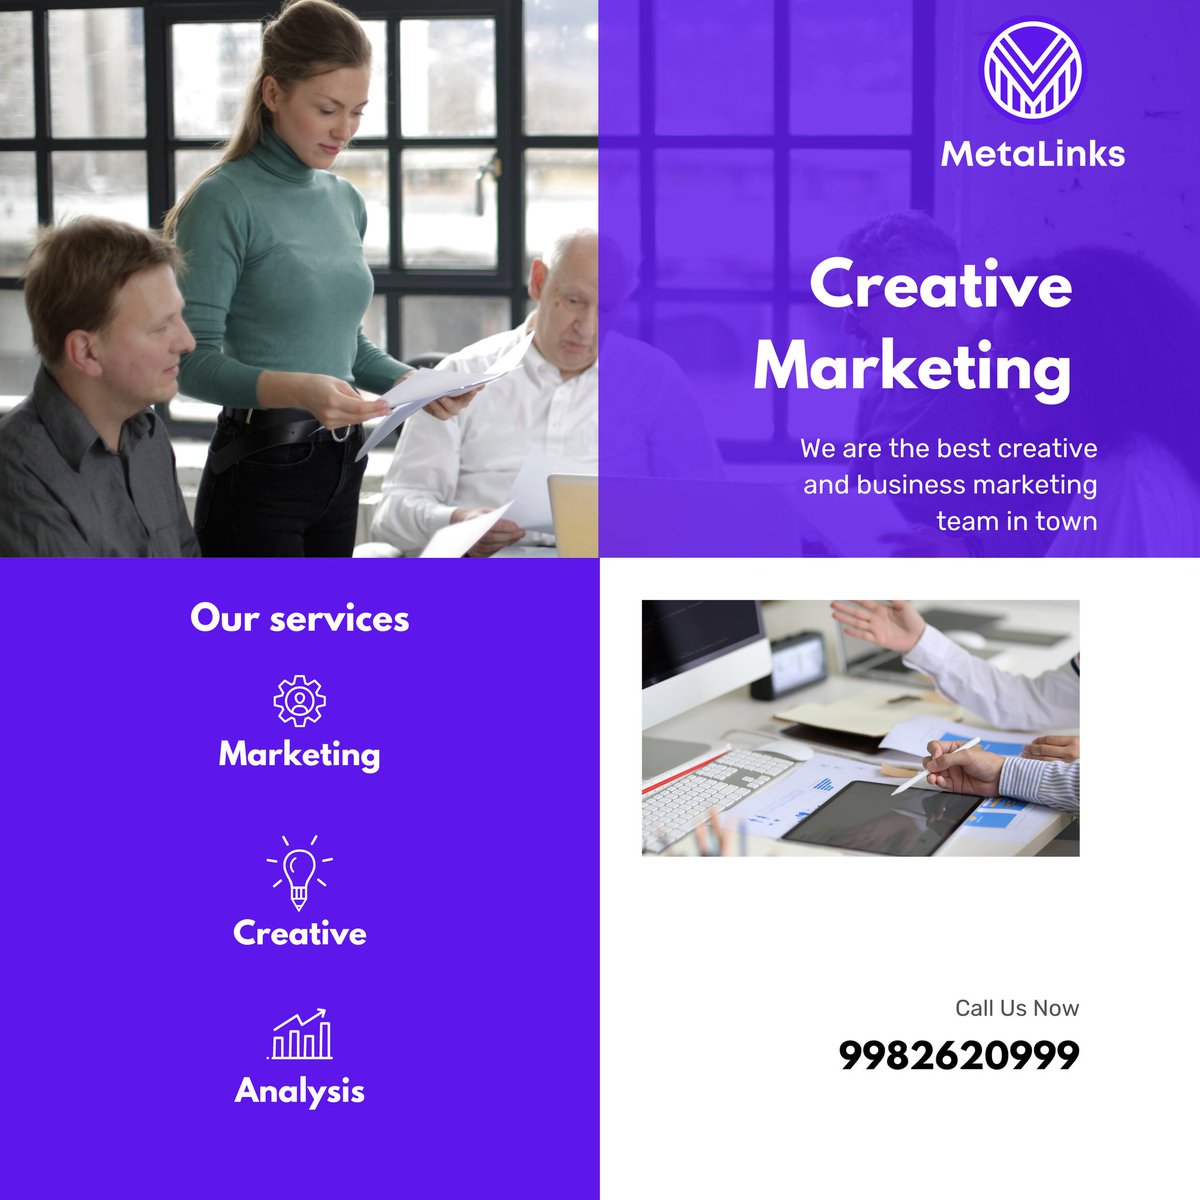 Ready to take your brand to the next level? Our creative team at #MetaLinks is here to help! 💥👨‍💼👩‍💼 #MarketingGurus #BrandBoost #CreativeSolutions